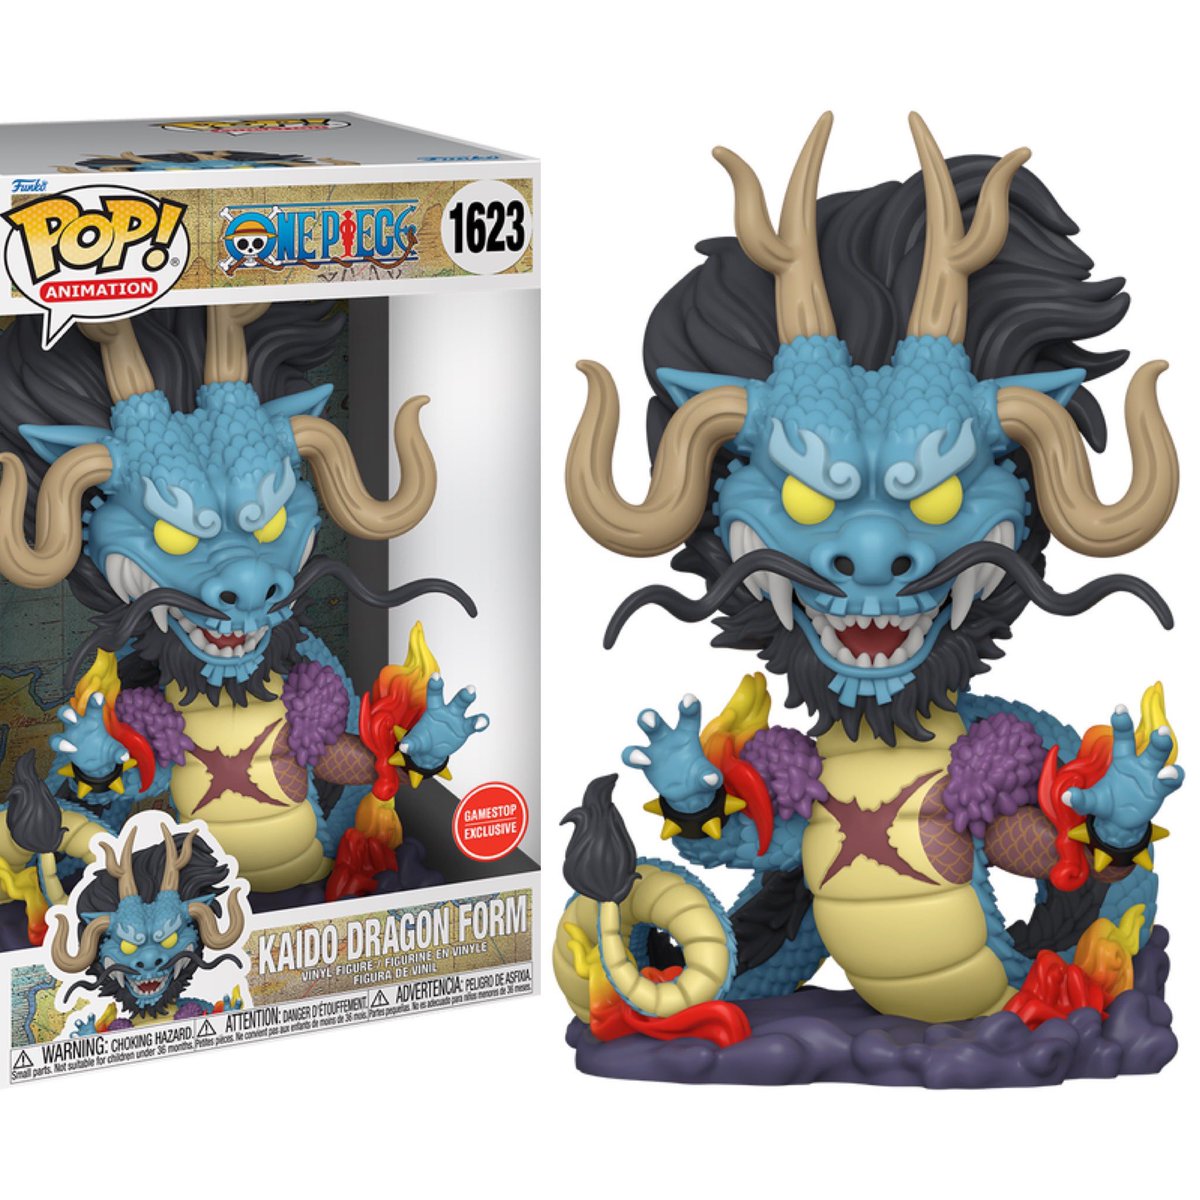 Take a first look at the latest Kaido Dragon Form Funko Pop from @OriginalFunko in all its glory! 🐉 #OnePiece